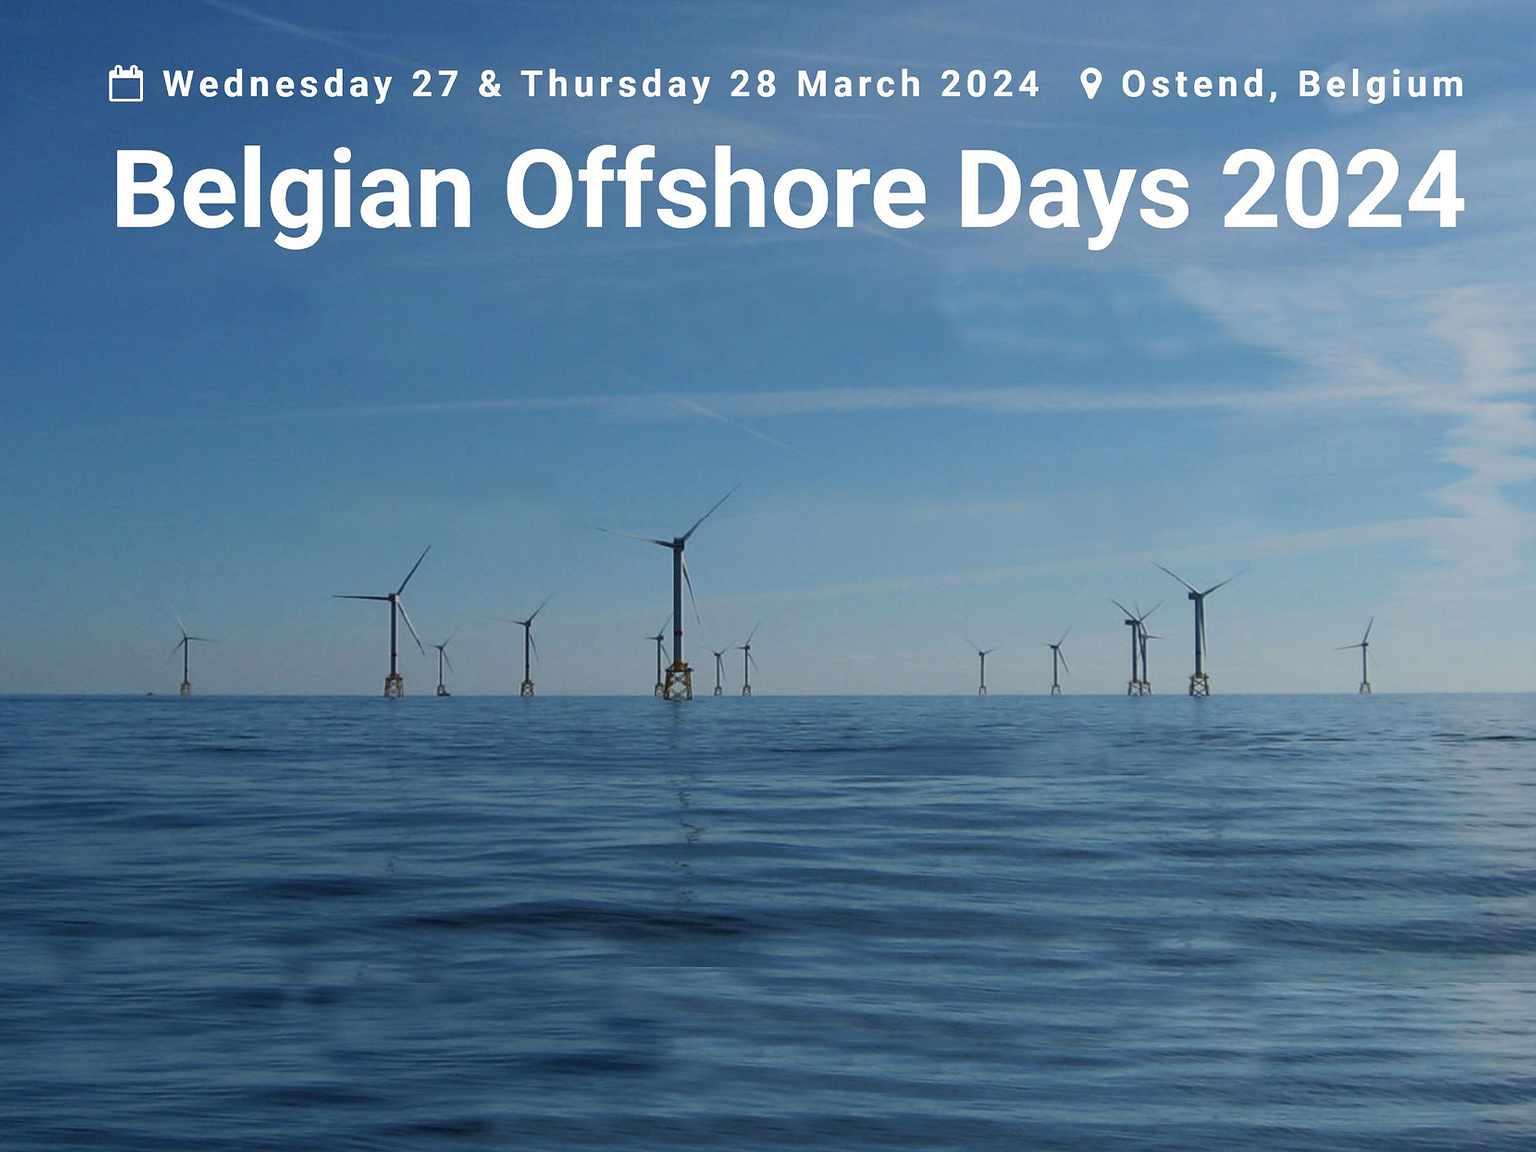 Skills & workforce for the offshore renewable energy industry @ Belgian Offshore Days